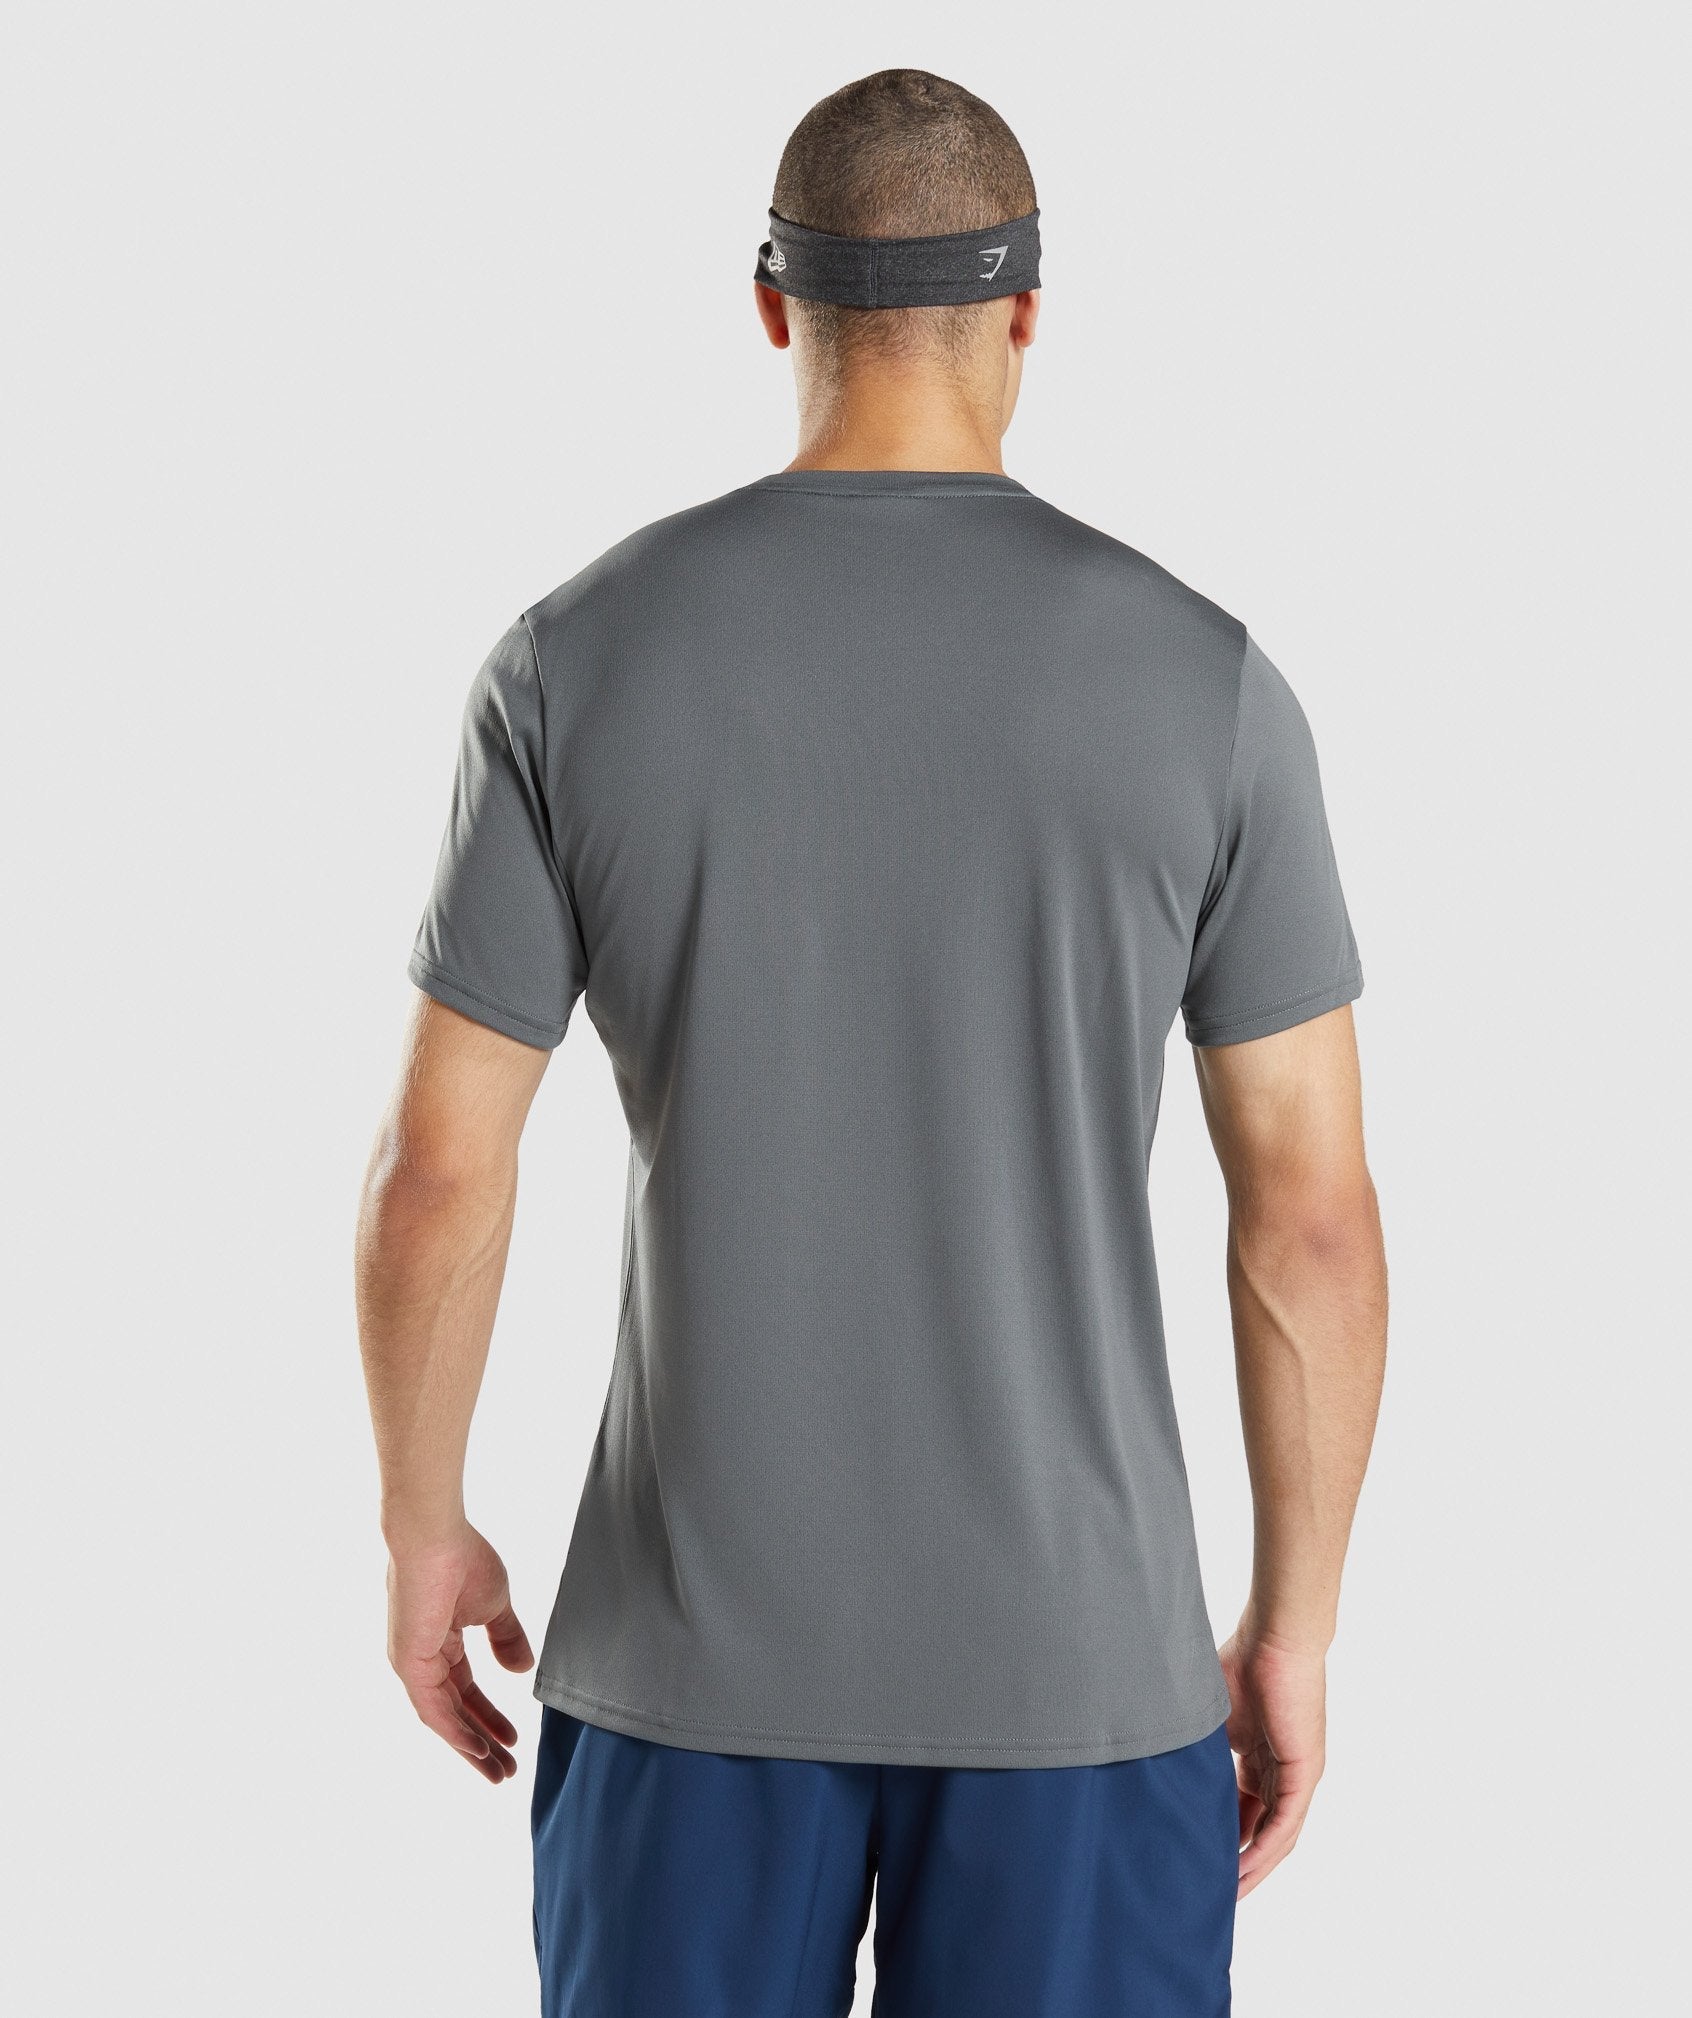 Arrival T-Shirt in Charcoal - view 2